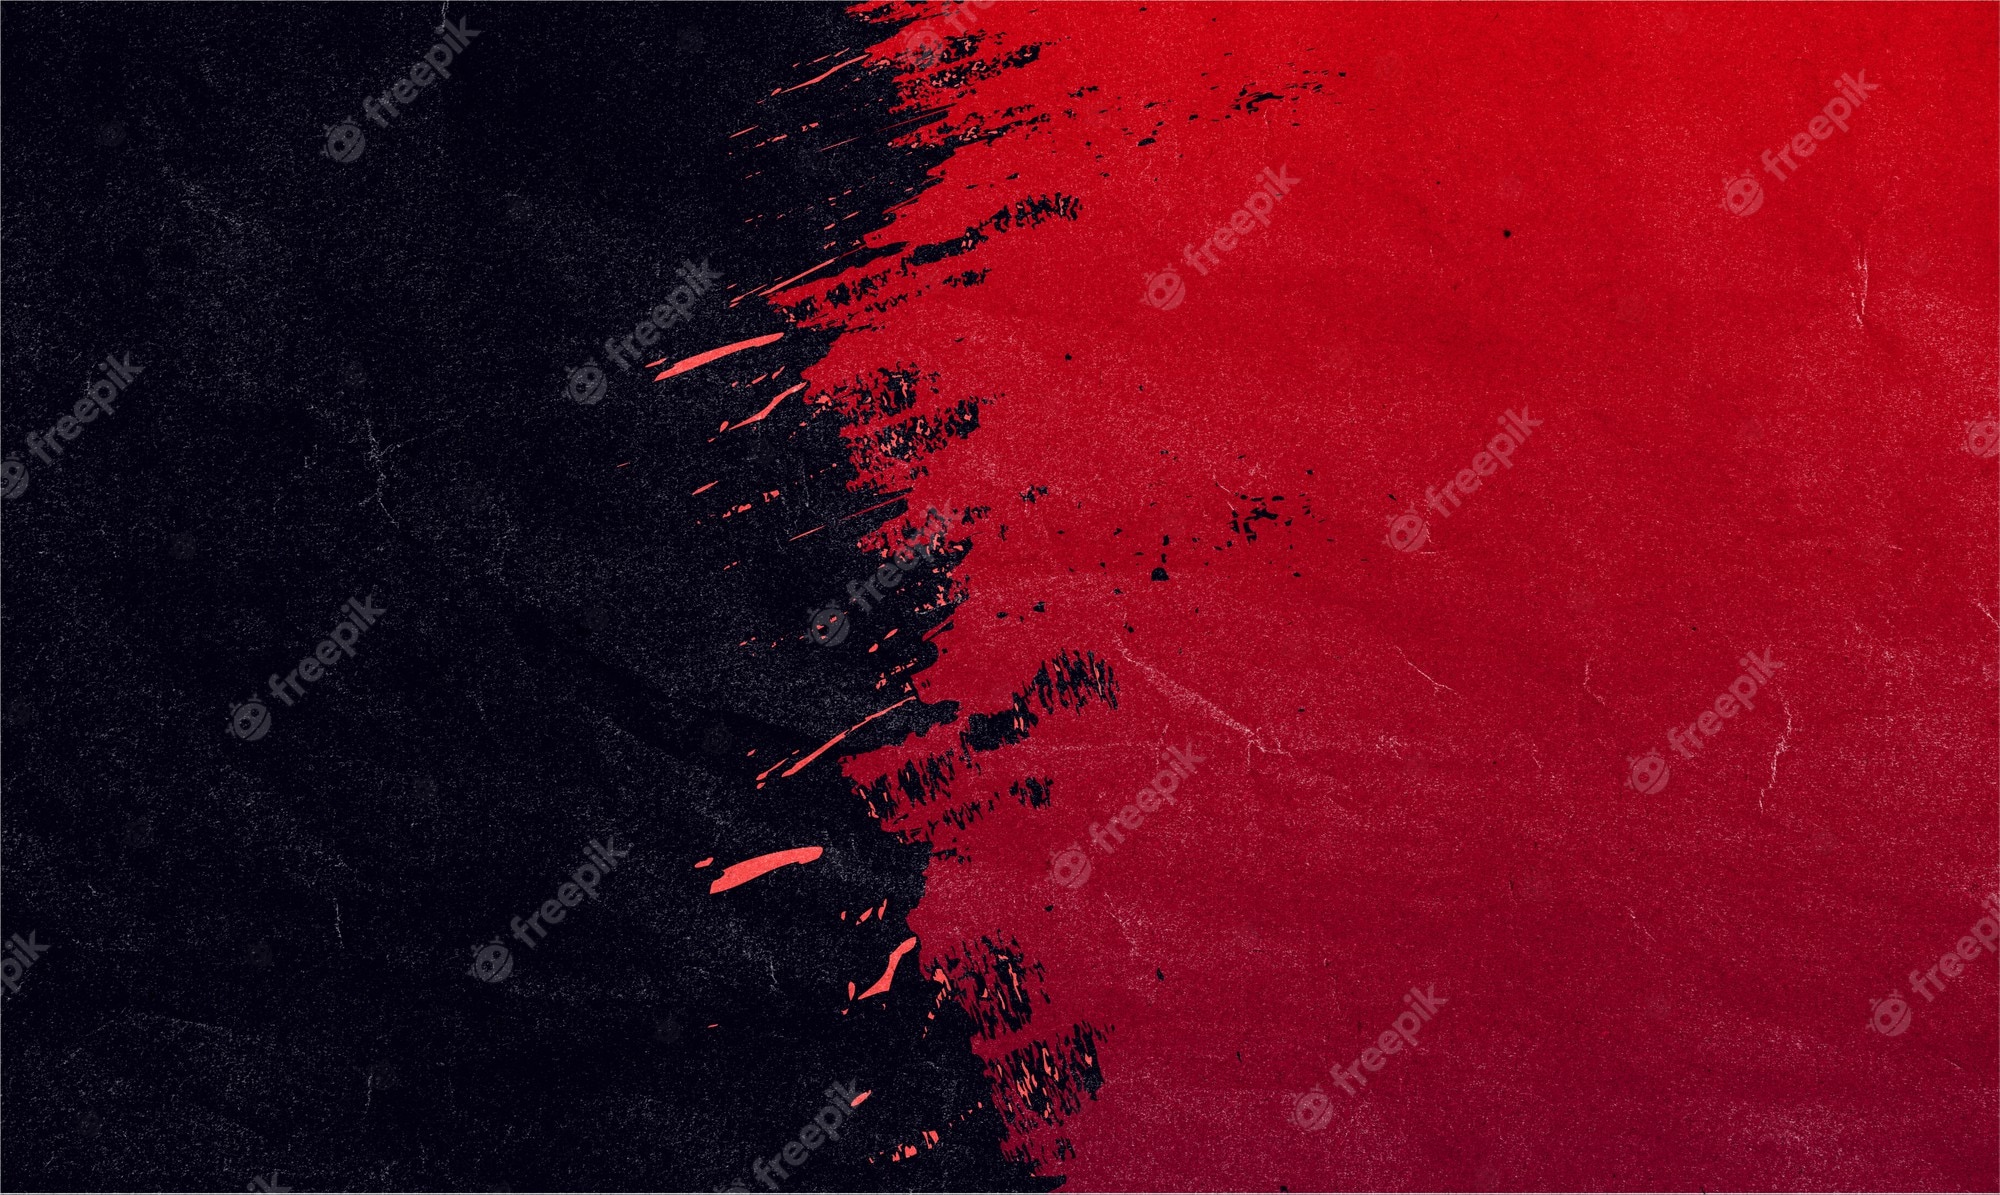 A black and red grunge background with a central abstract design - Dark red